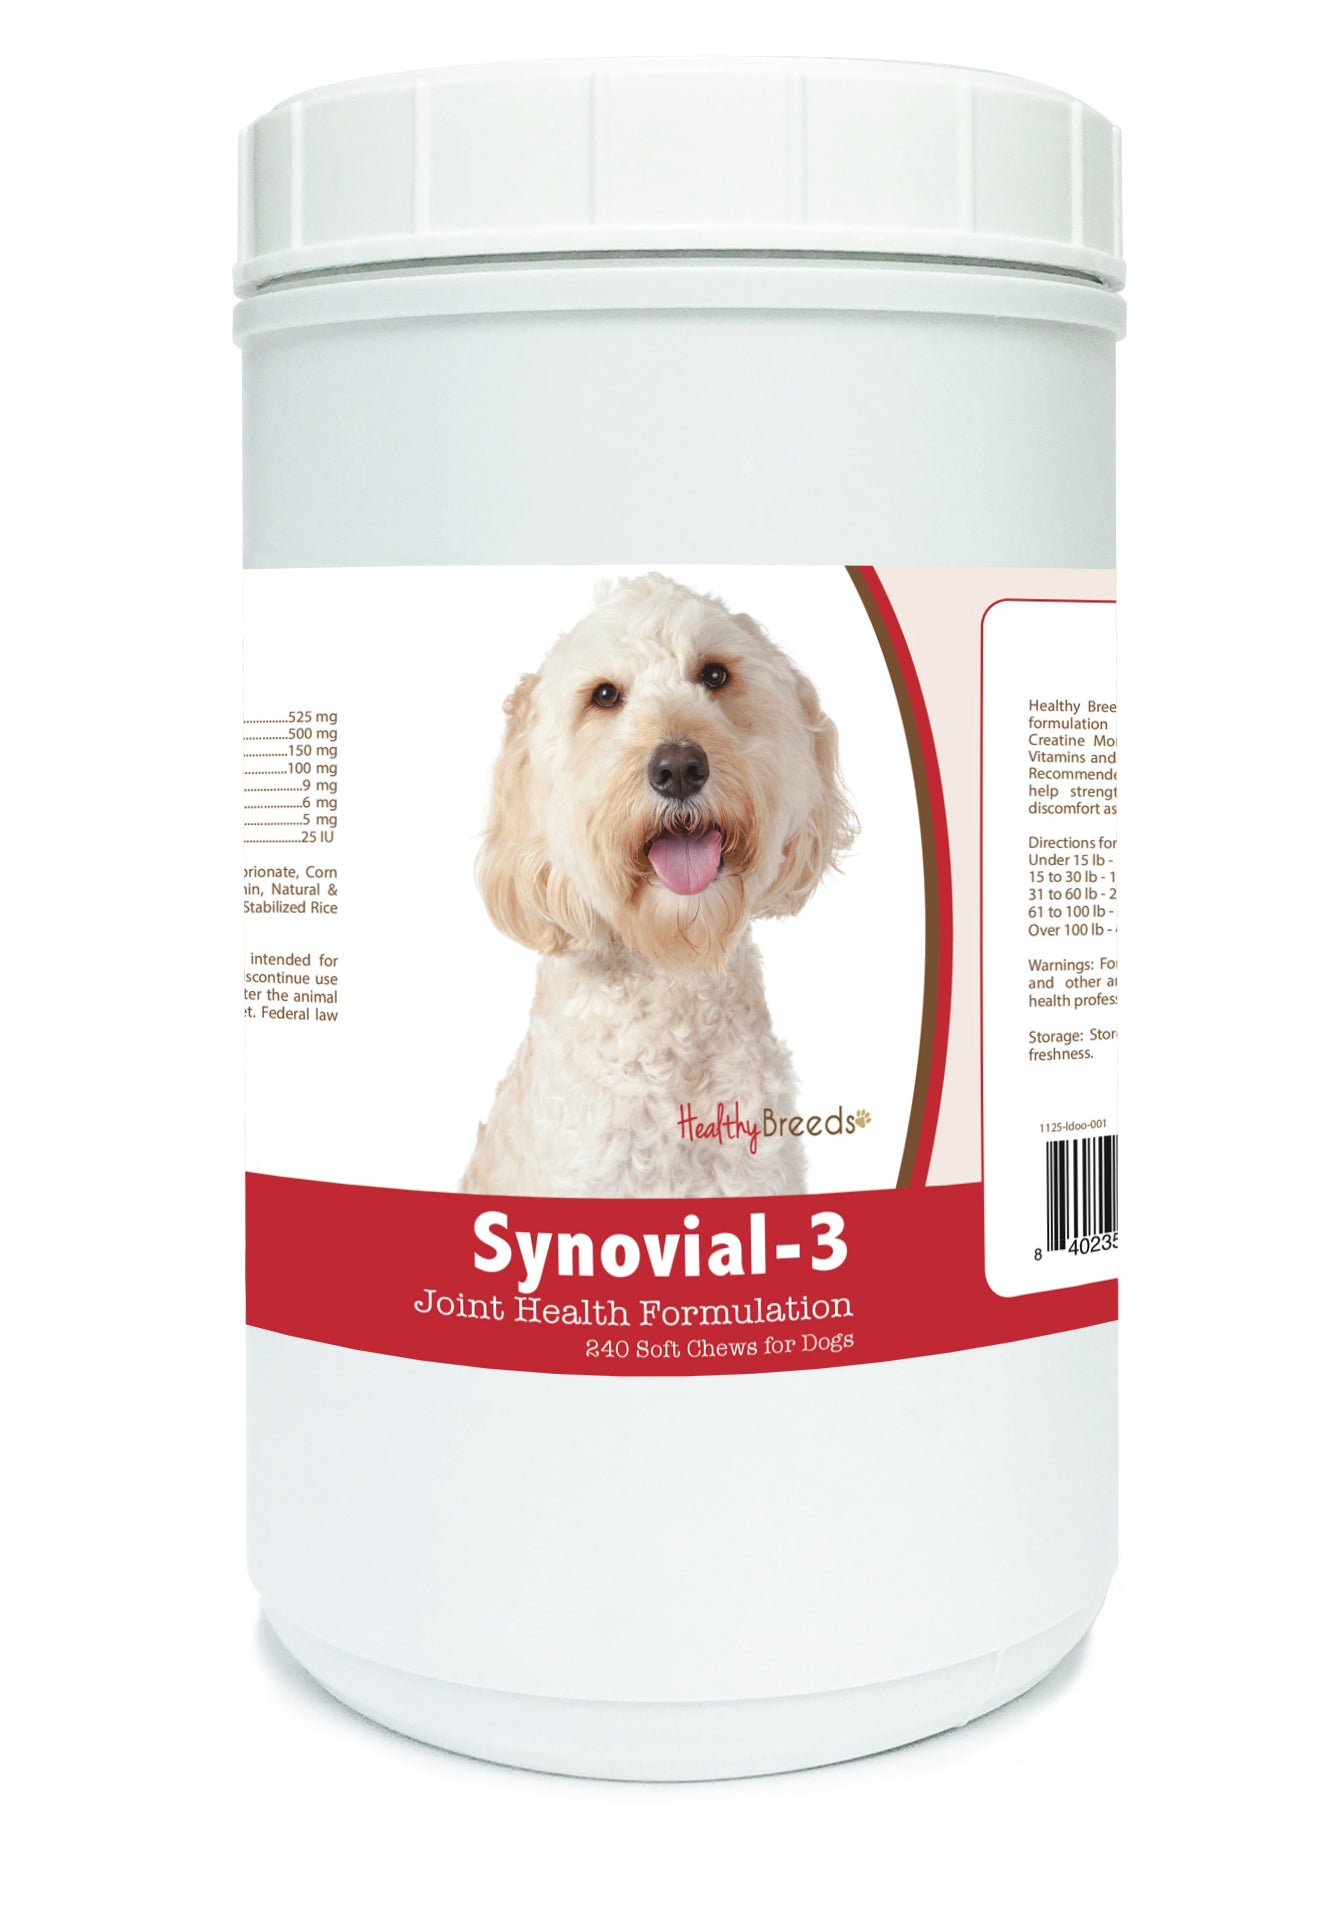 Labradoodle Synovial-3 Joint Health Formulation Soft Chews 240 Count